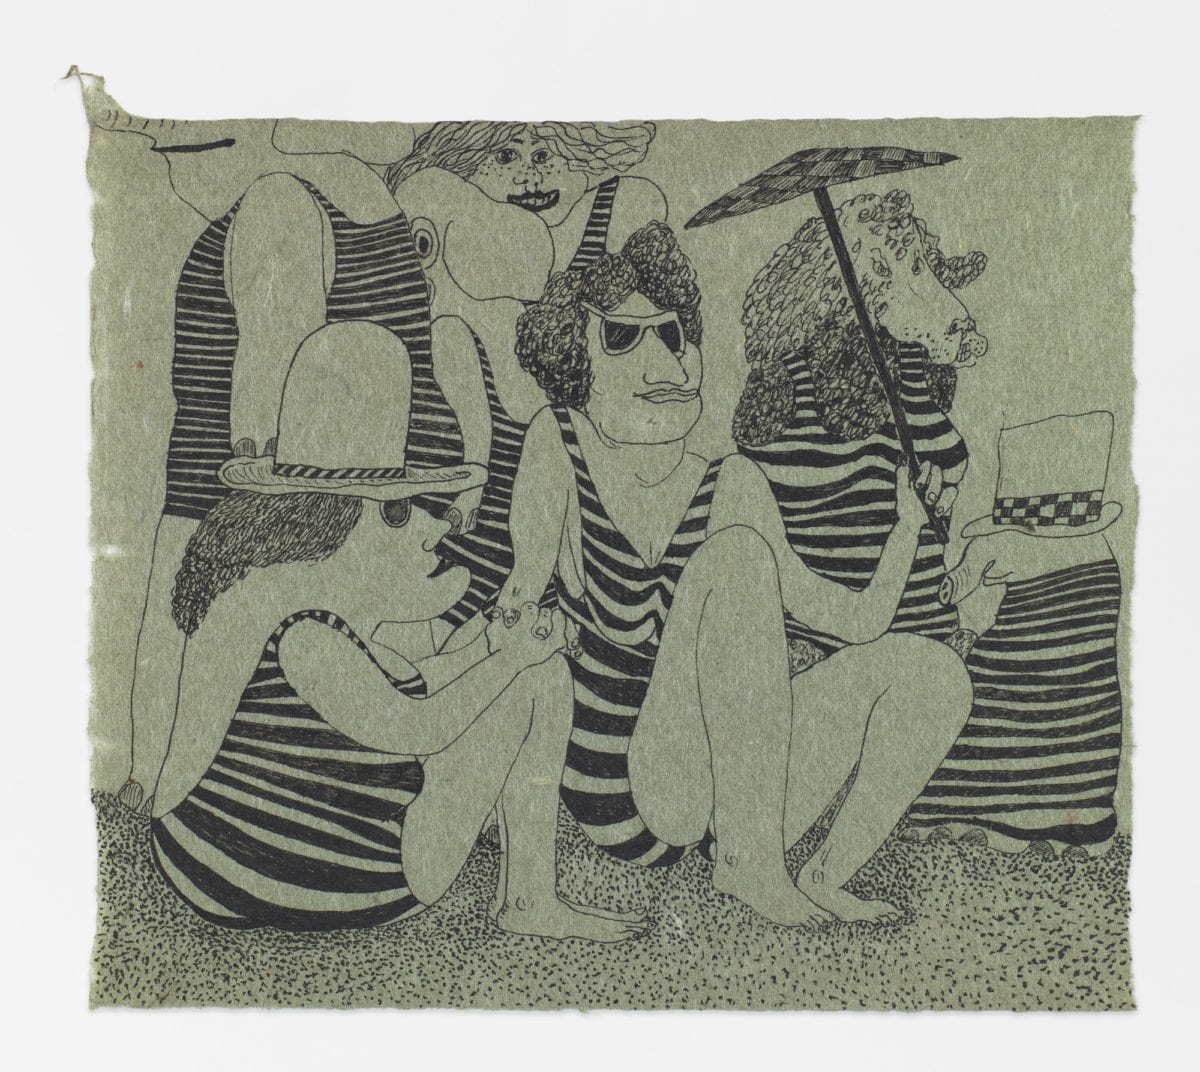 Gladys Nilsson, Rented Bathing Suits, 1965. Courtesy the artist and Garth Greenan Gallery, New York